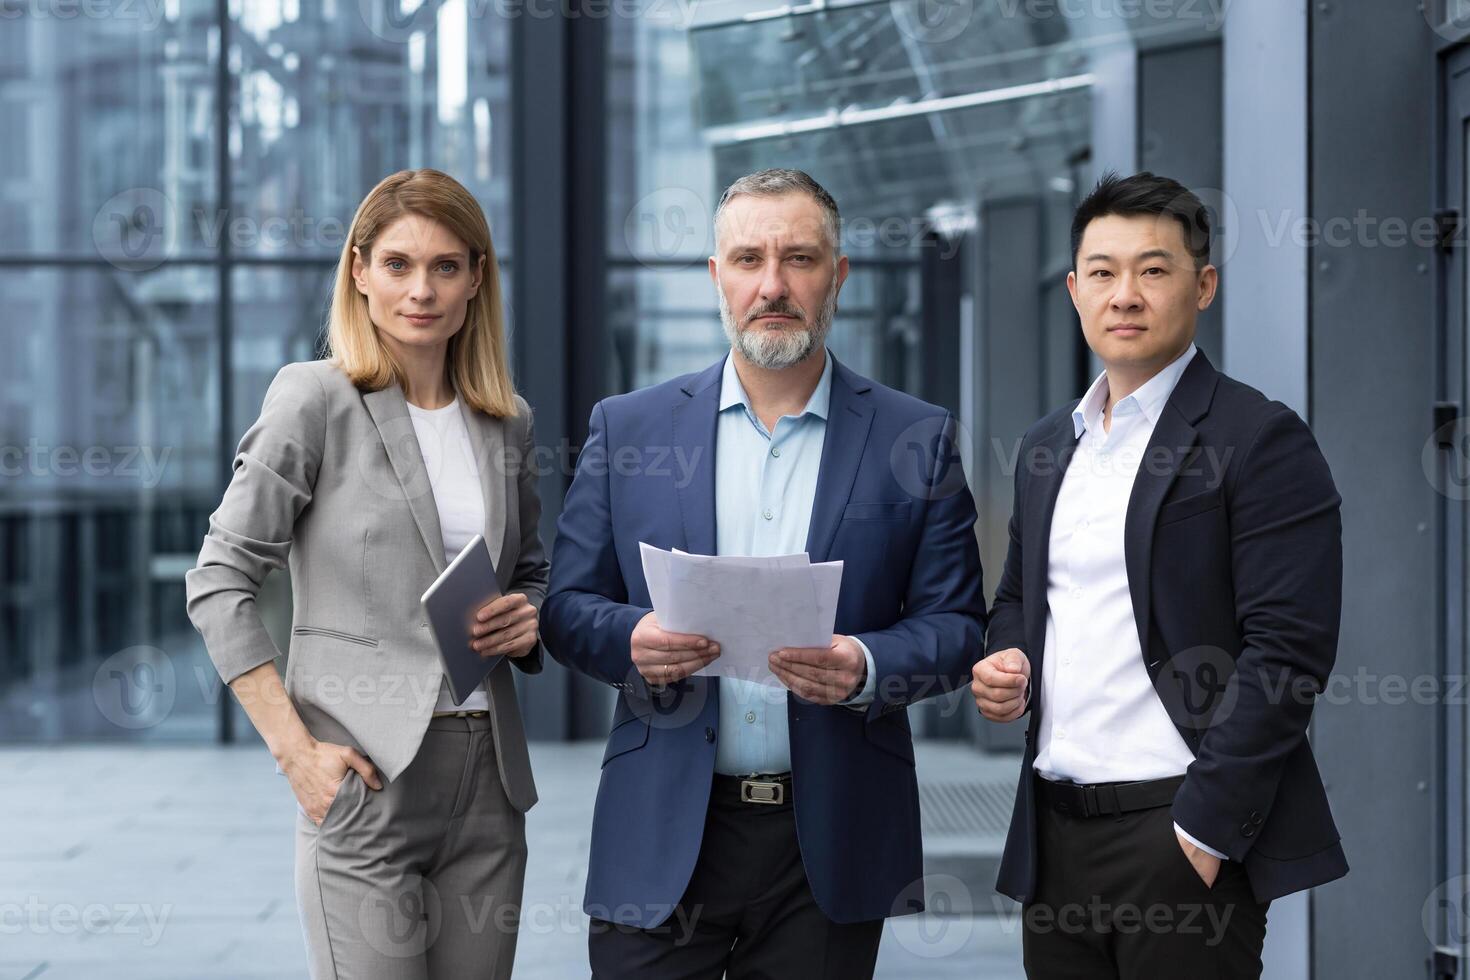 A team of experienced team leaders and specialists, a diverse group of business people, three people in business clothes are serious and focused in business clothes looking at the camera photo